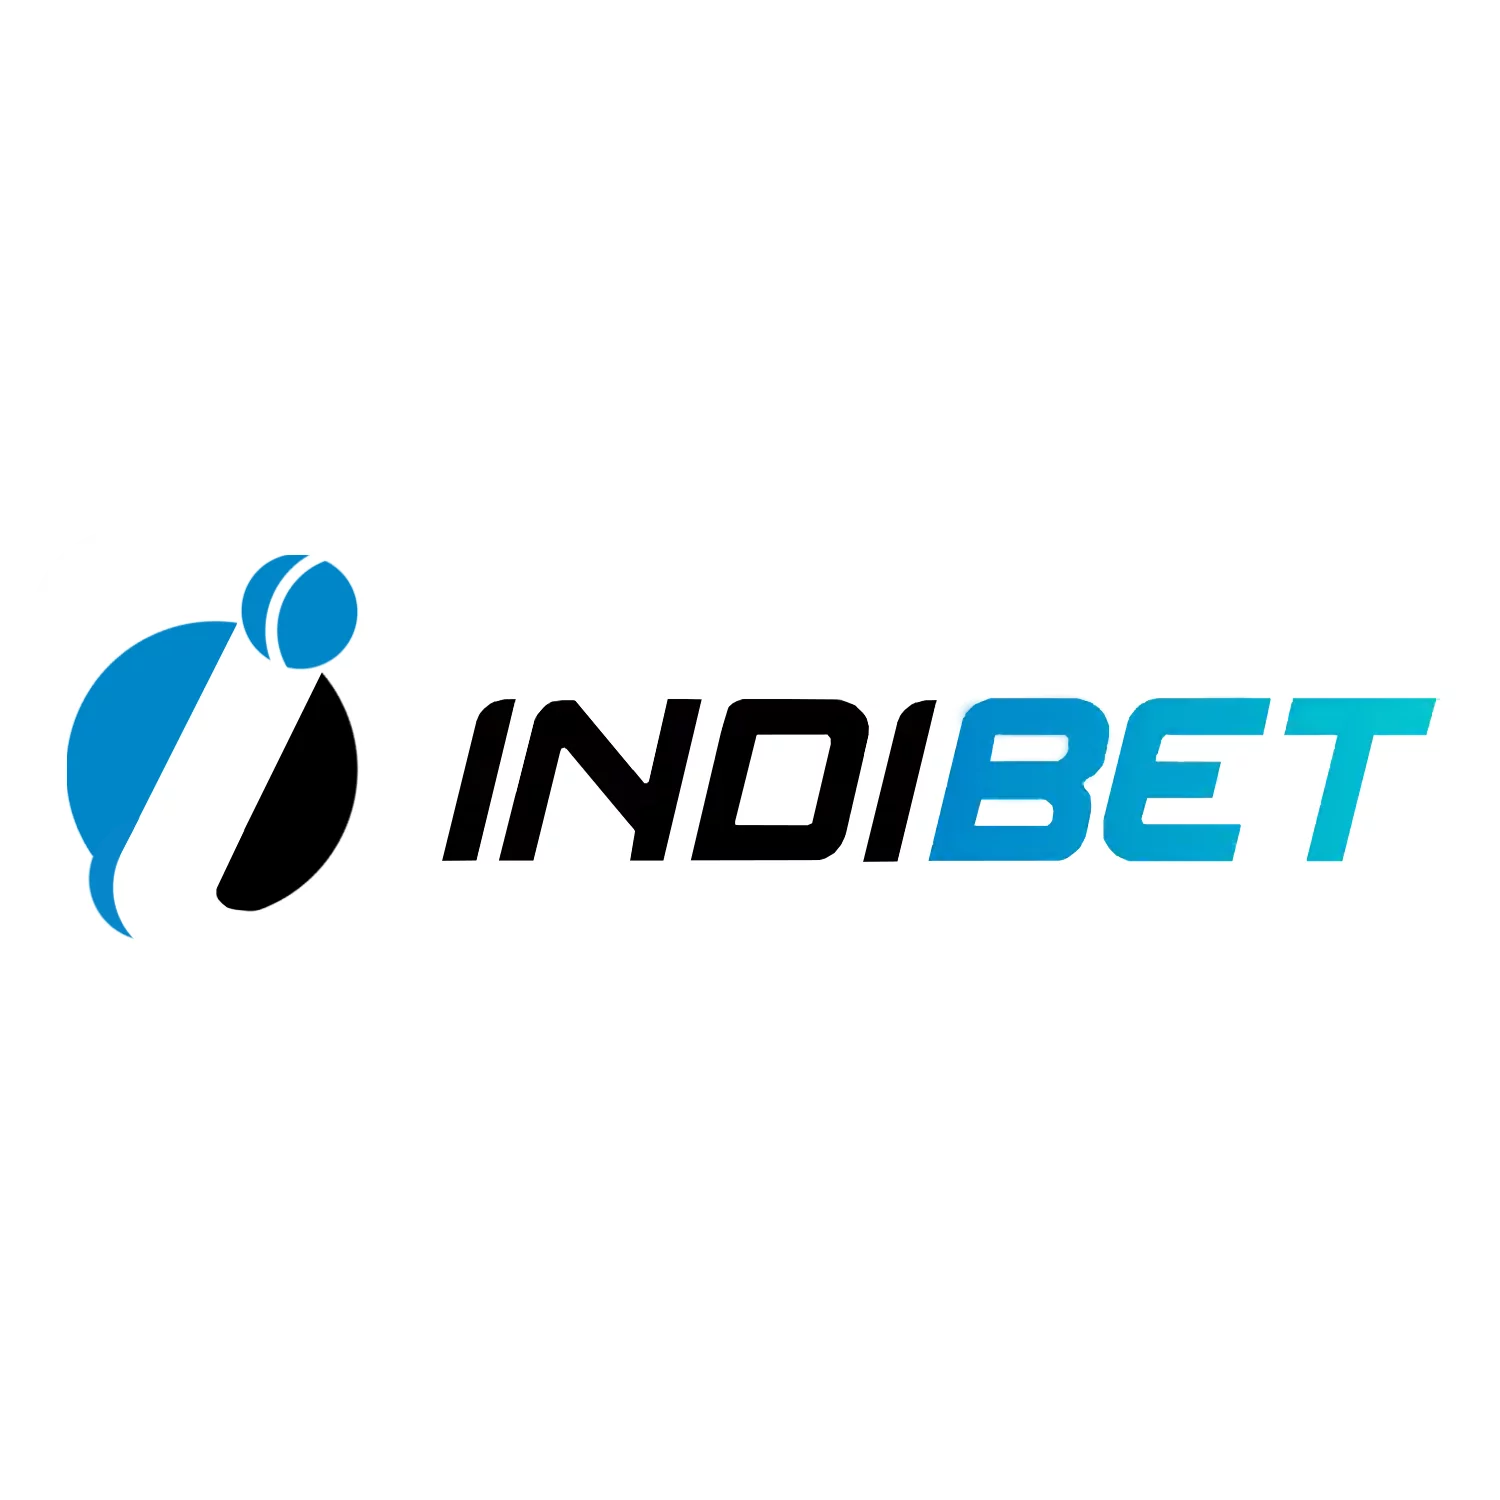 In this article, we share the review about betting and playing casino on Indibet.